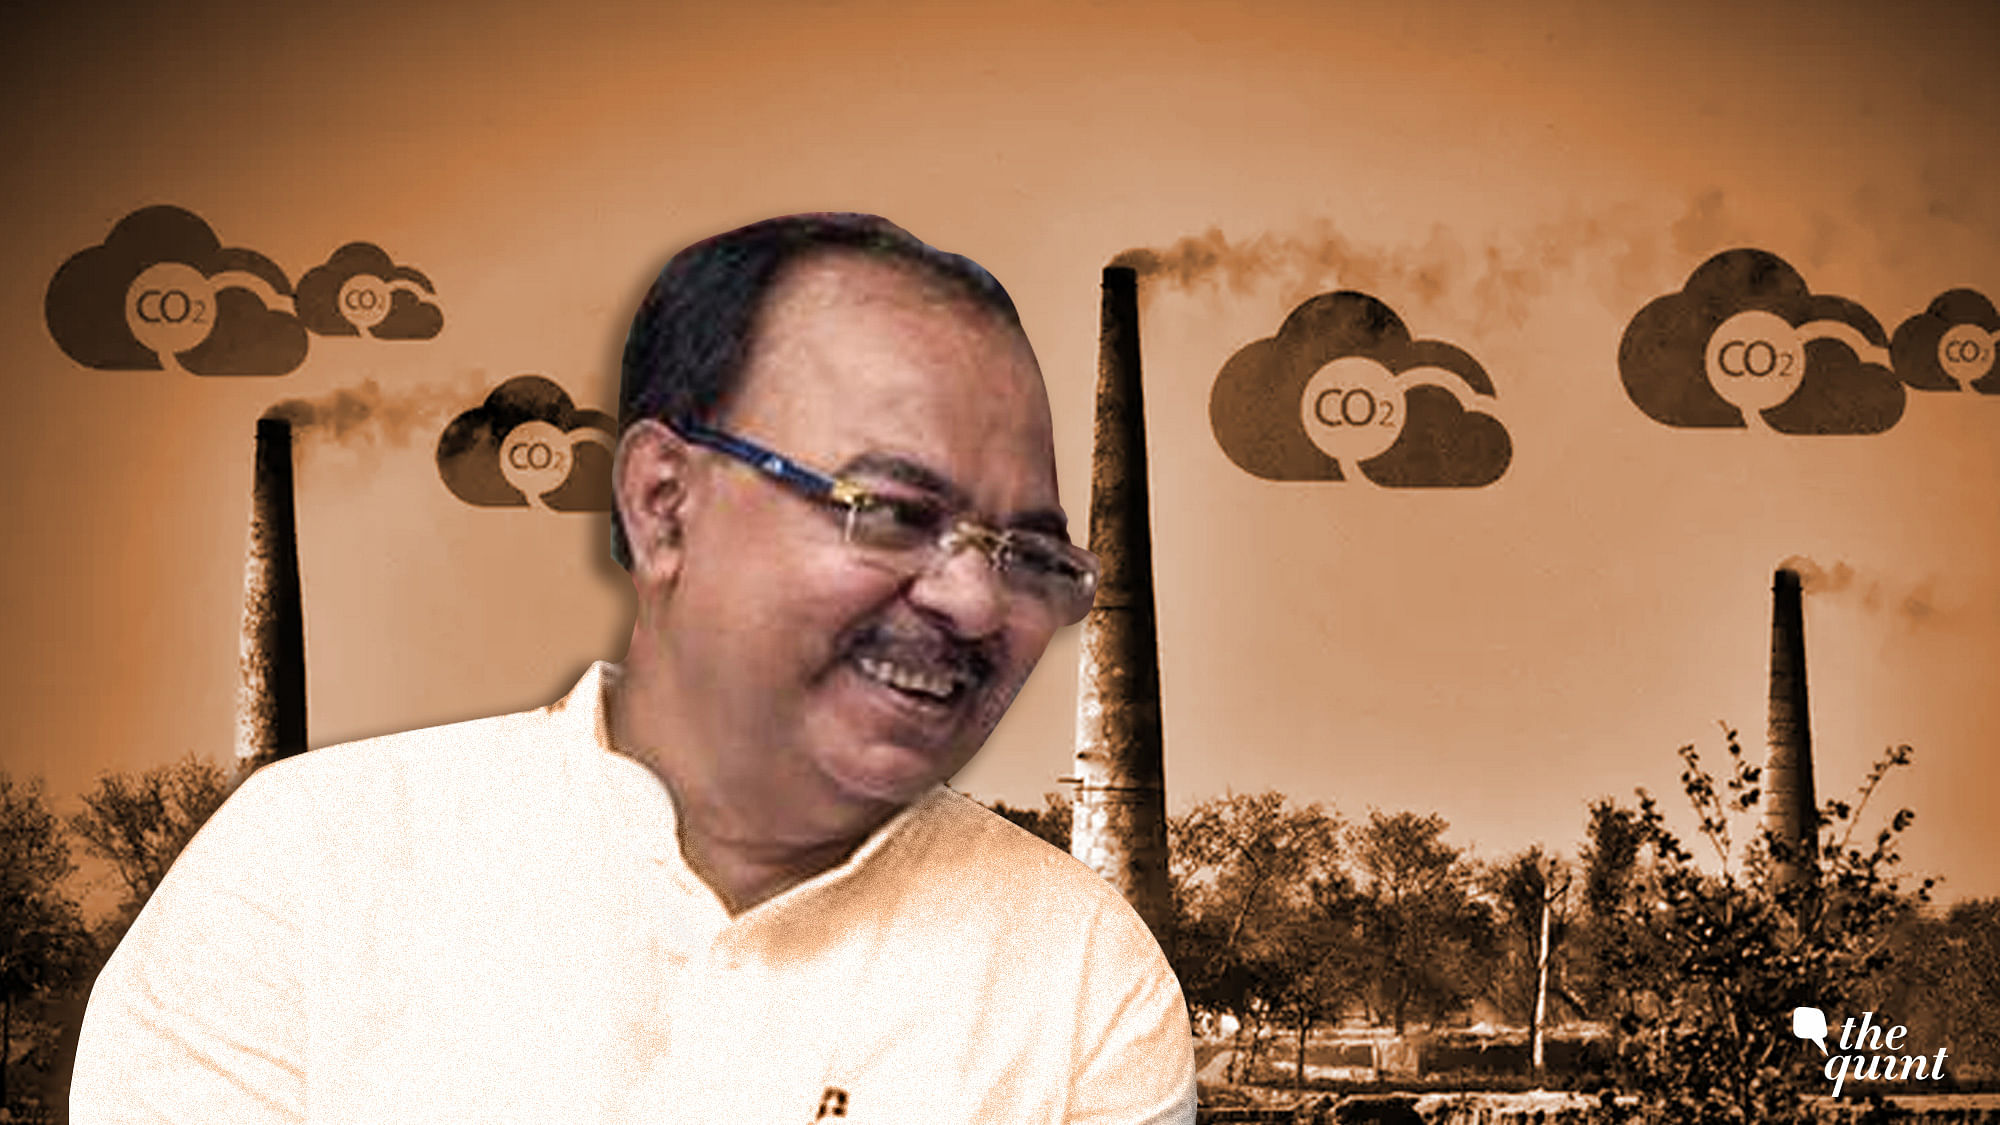 Kolkata Mayor and state environment minister, Sovan Chatterjee, addressed the press on the issue of air pollution for the first time ever.